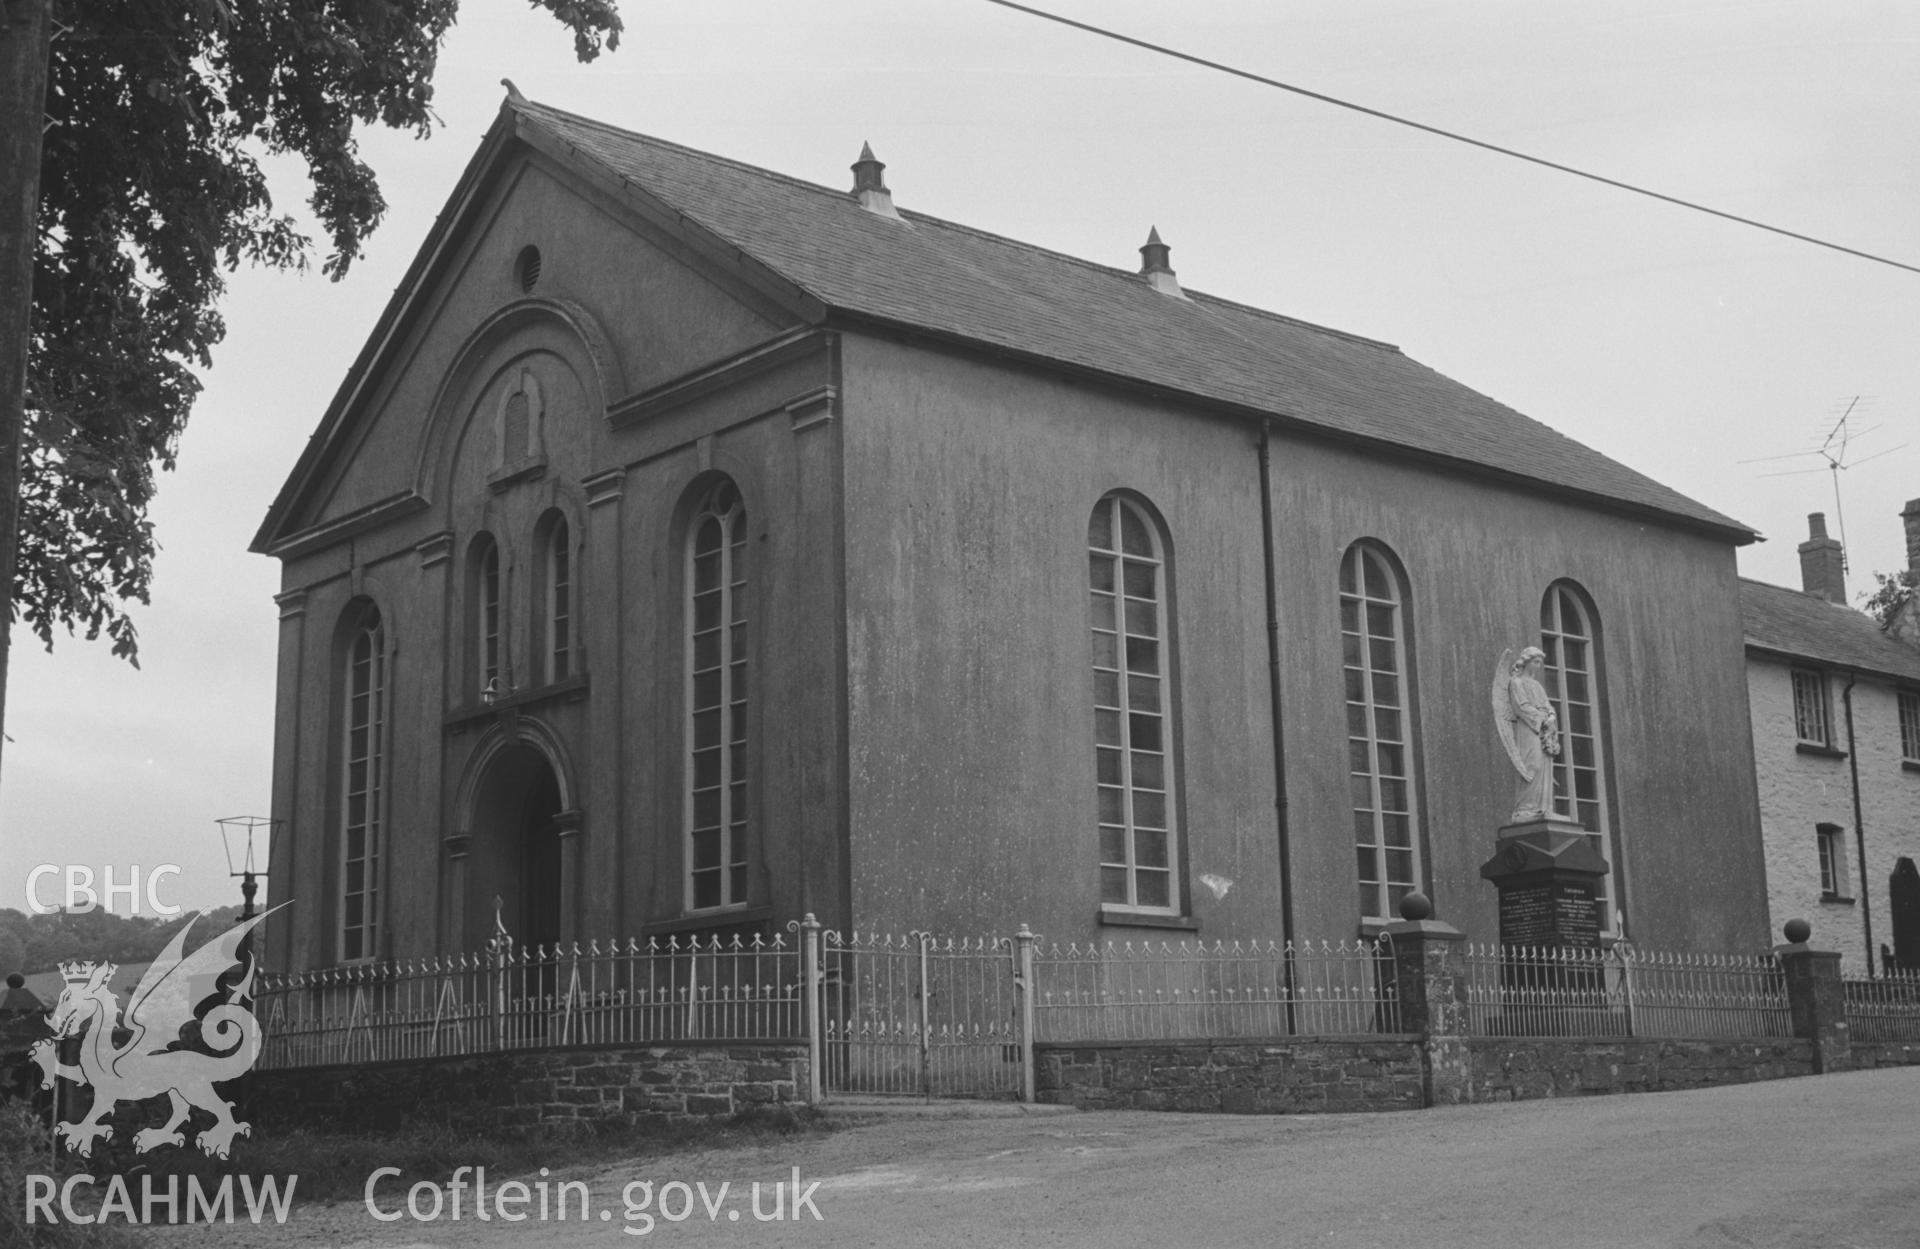 Digital copy of a black and white negative showing Neuadd Lwyd Welsh Independent Chapel, Neuadd Lwyd, 4km south east of Aberaeron. Photographed by Arthur O. Chater on 5th September 1966 looking south from Grid Reference SN 475 596.